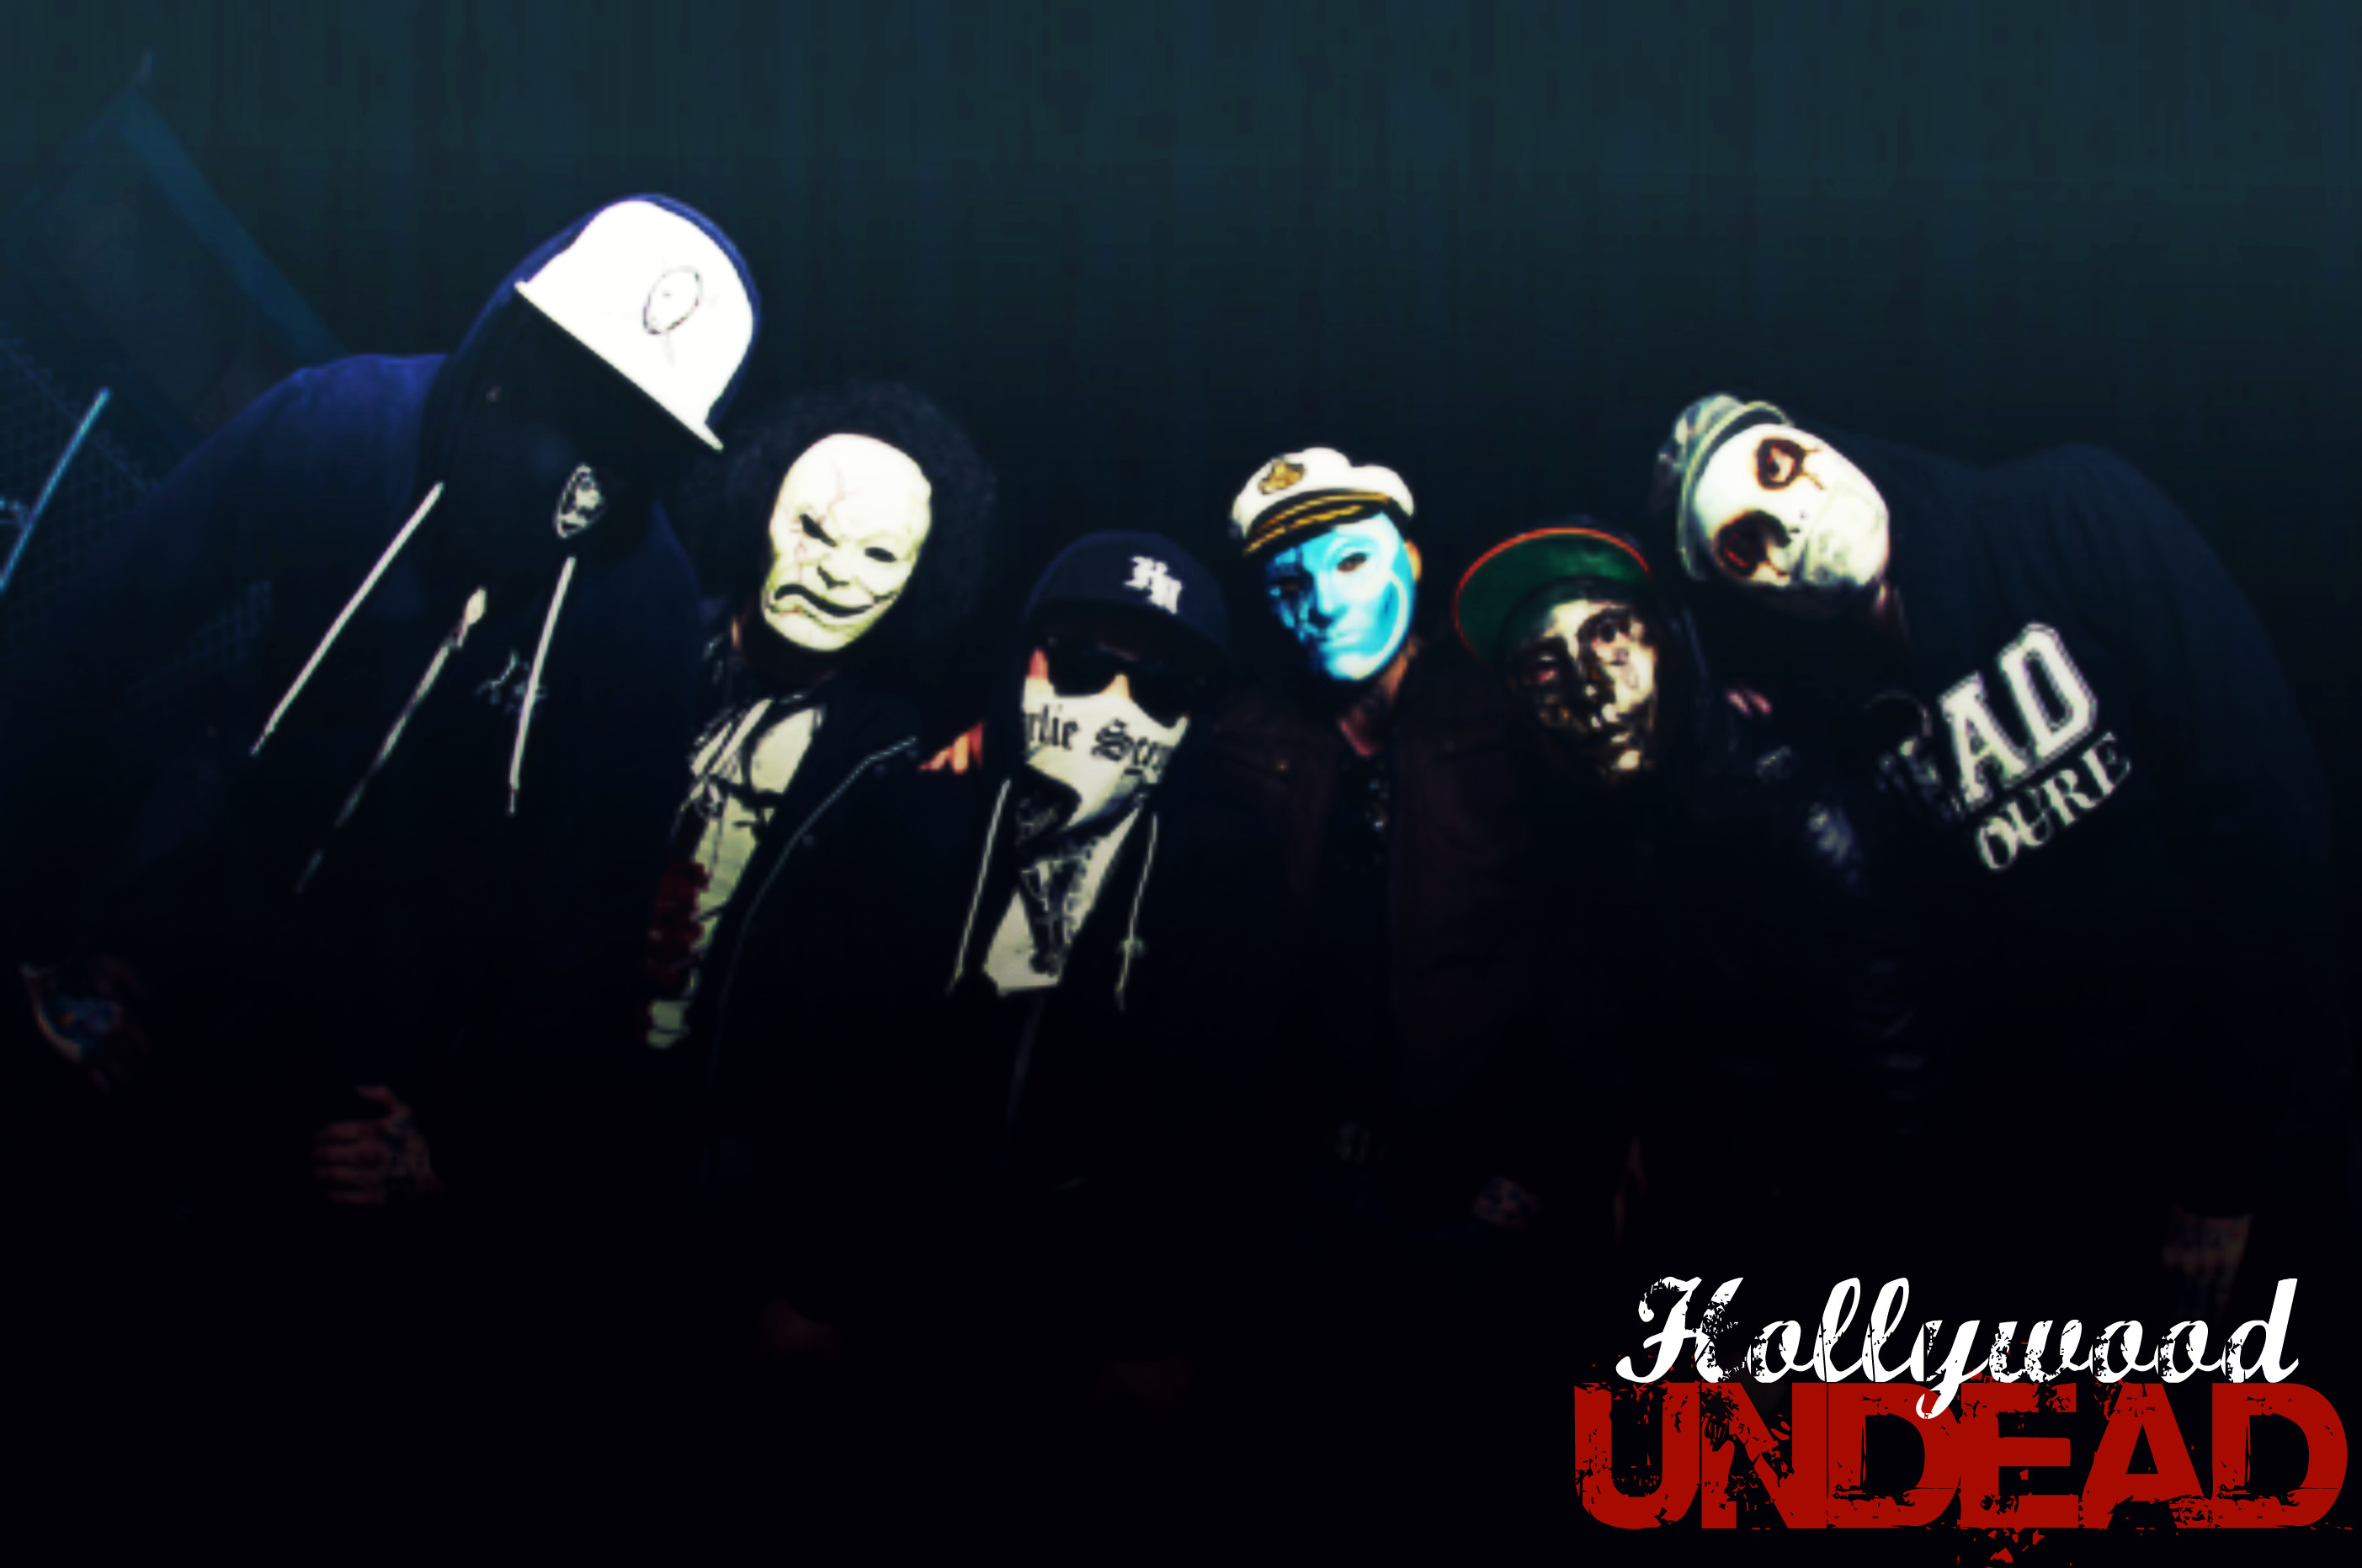 2806x1863 ... WelcometoBloodstone Hollywood Undead - Wallpaper 7 by  WelcometoBloodstone